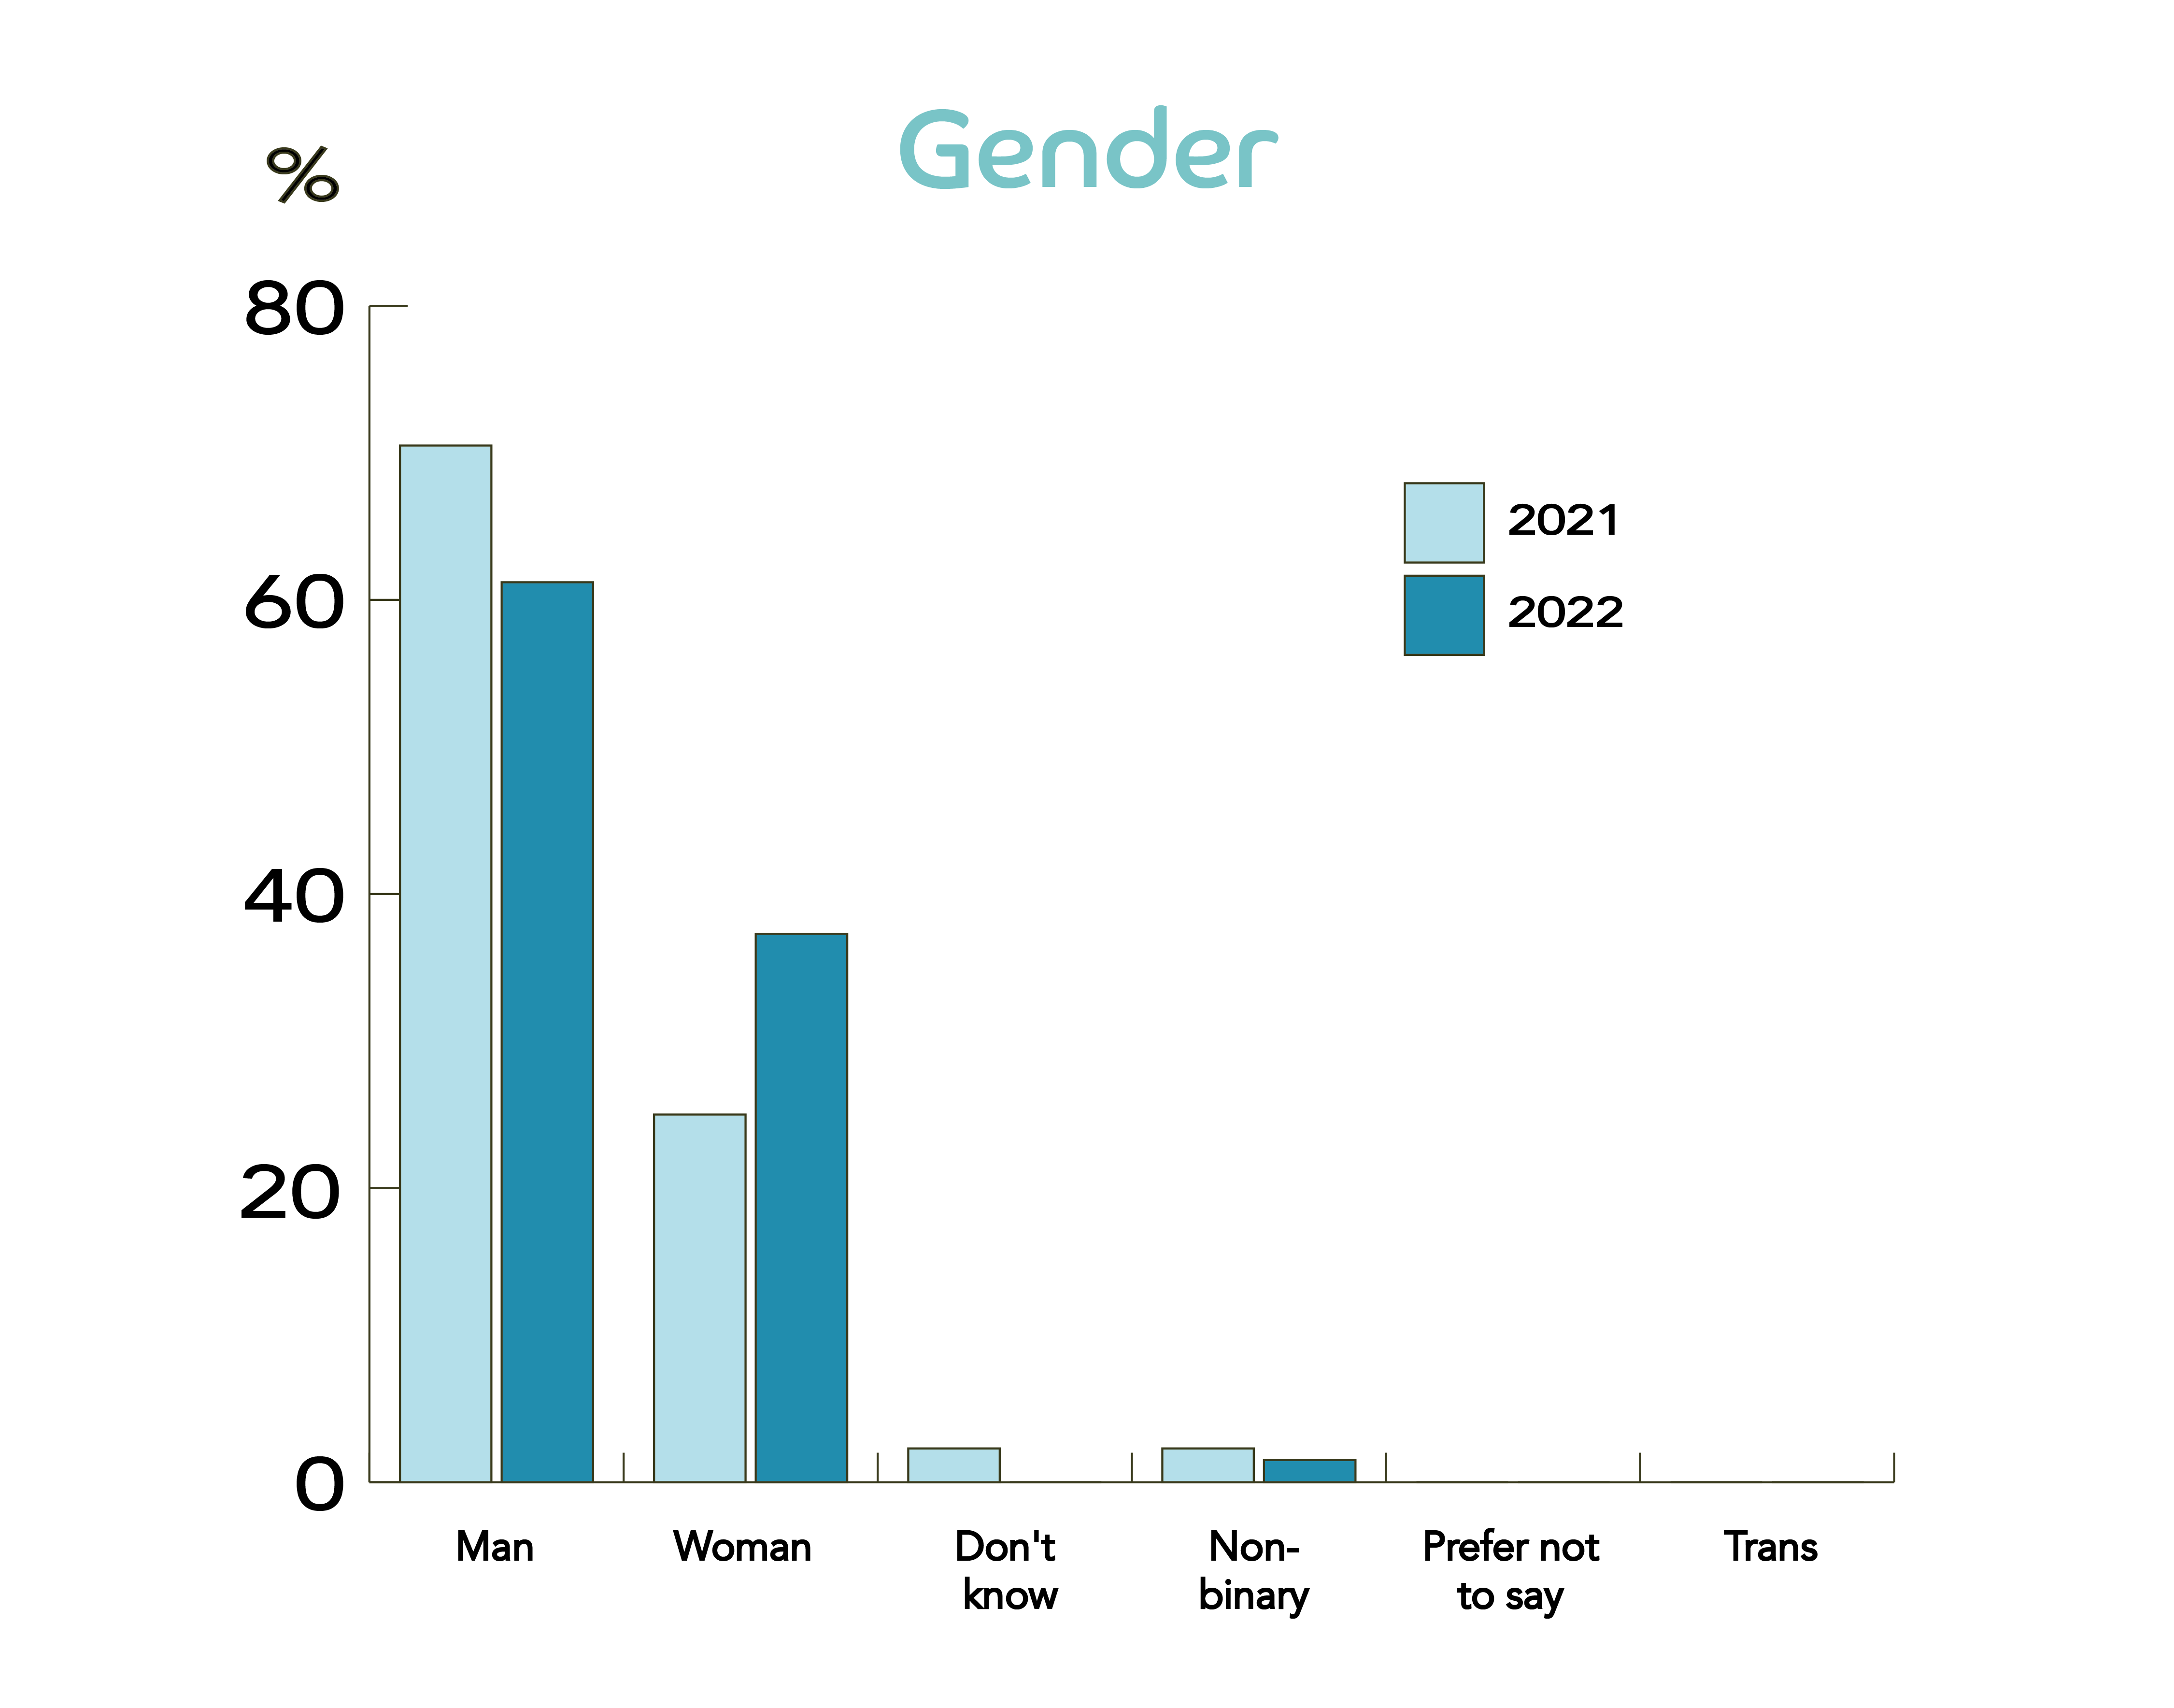 Bar chart showing survey responses to 'Gender'